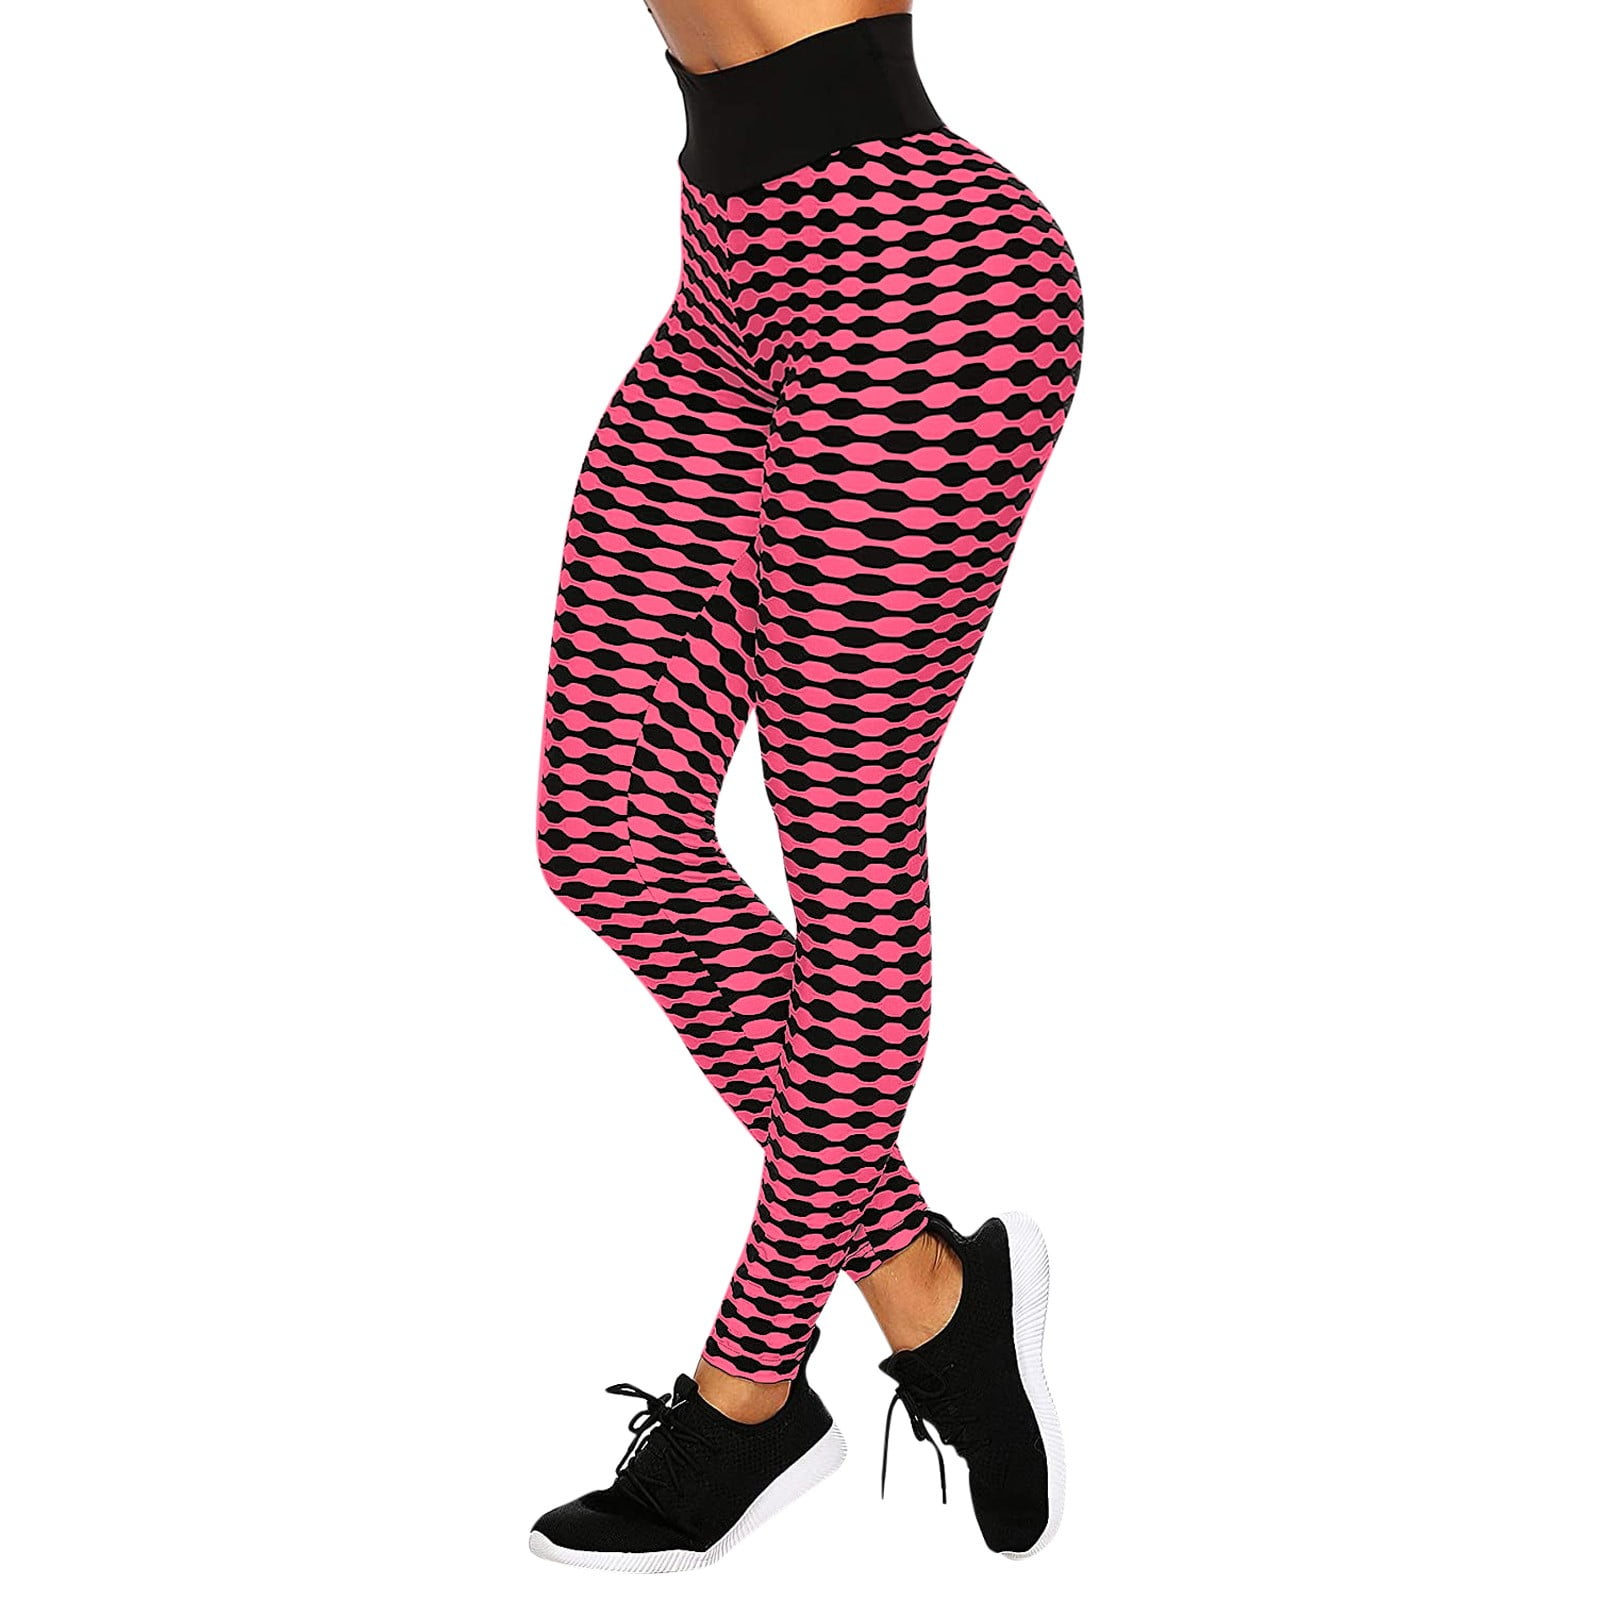 HAPIMO Sales Women's Yoga Pants High Waist Tummy Control Workout Pants Hip  Lift Tights Stretch Athletic Slimming Running Yoga Leggings for Women Pink  XL 